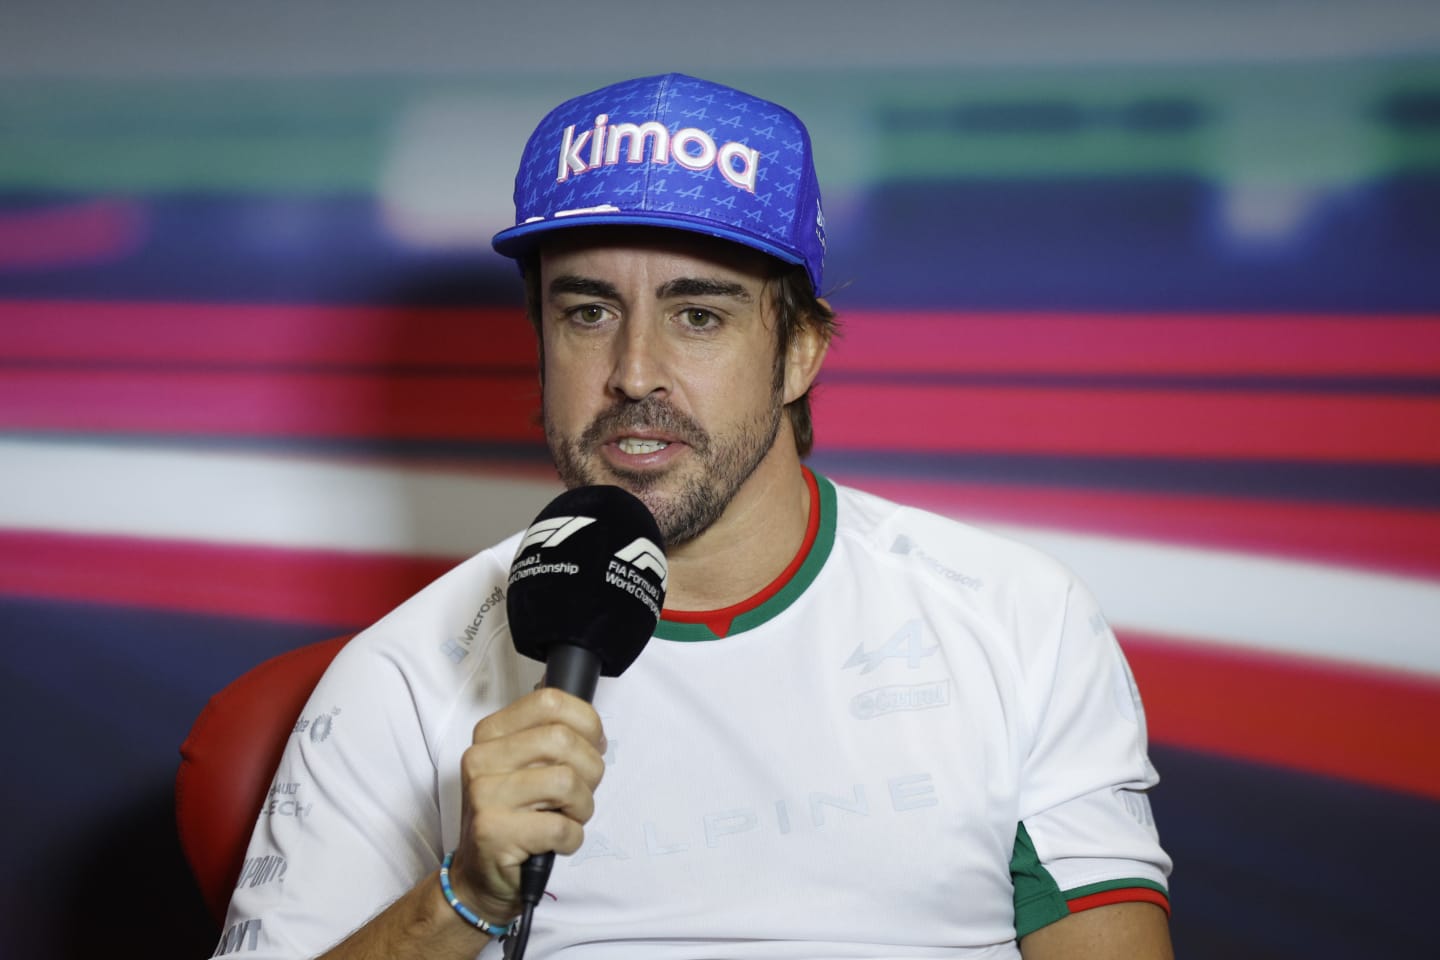 MEXICO CITY, MEXICO - OCTOBER 27: Fernando Alonso of Spain and Alpine F1 attends the Drivers Press Conference during previews ahead of the F1 Grand Prix of Mexico at Autodromo Hermanos Rodriguez on October 27, 2022 in Mexico City, Mexico. (Photo by Jared C. Tilton/Getty Images)